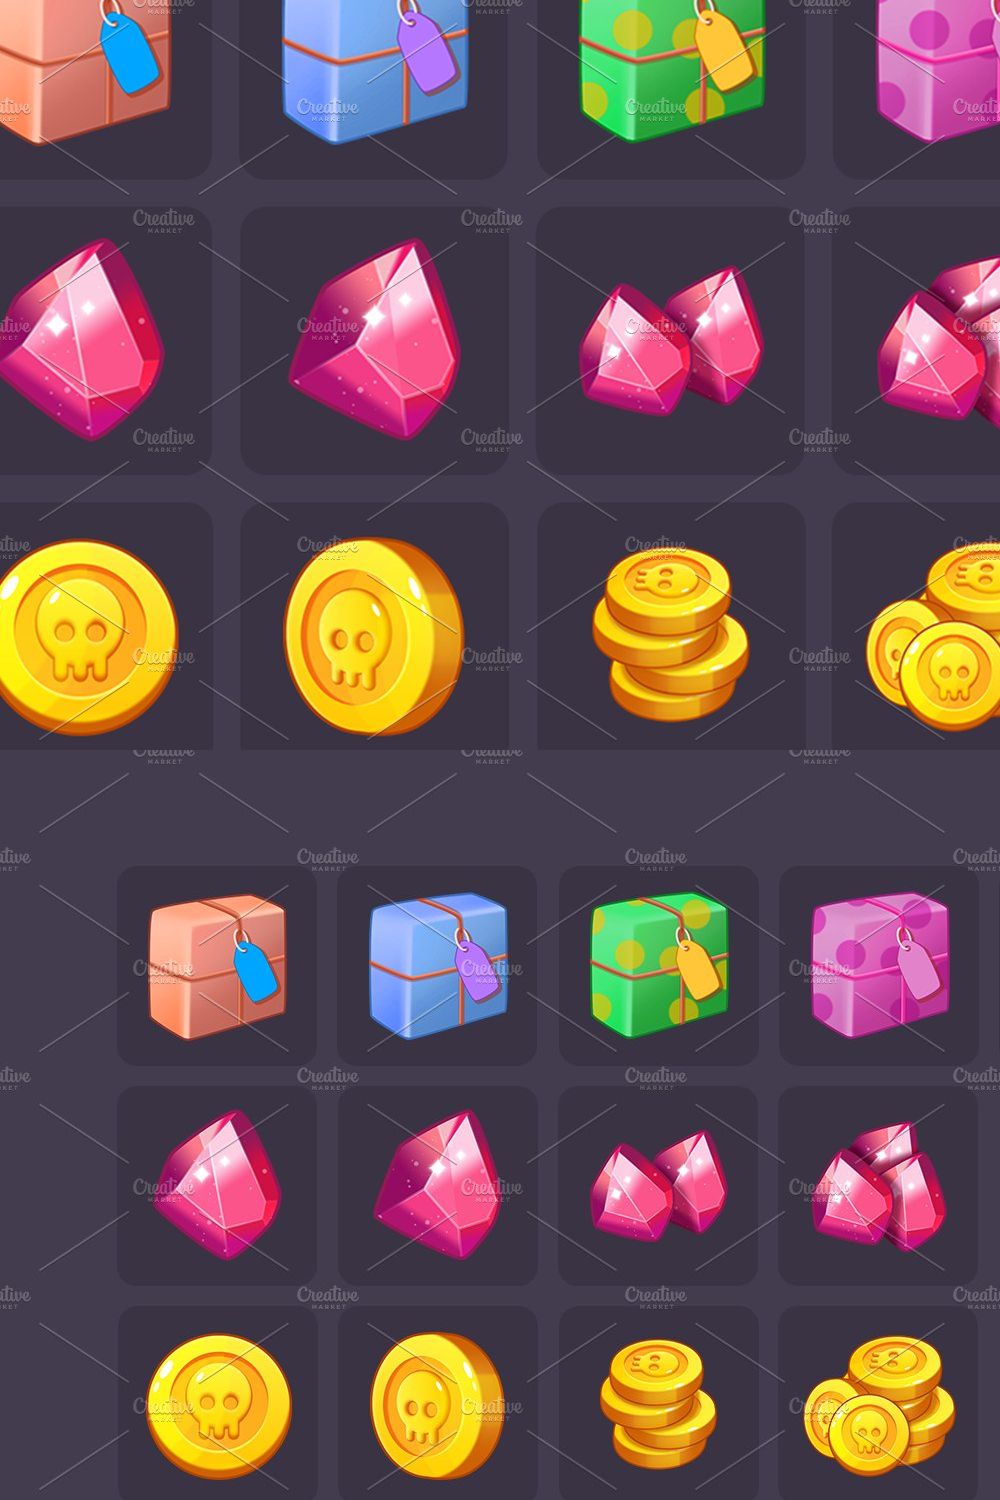 Icons_Coins_Gems_Hearts_Stars pinterest preview image.